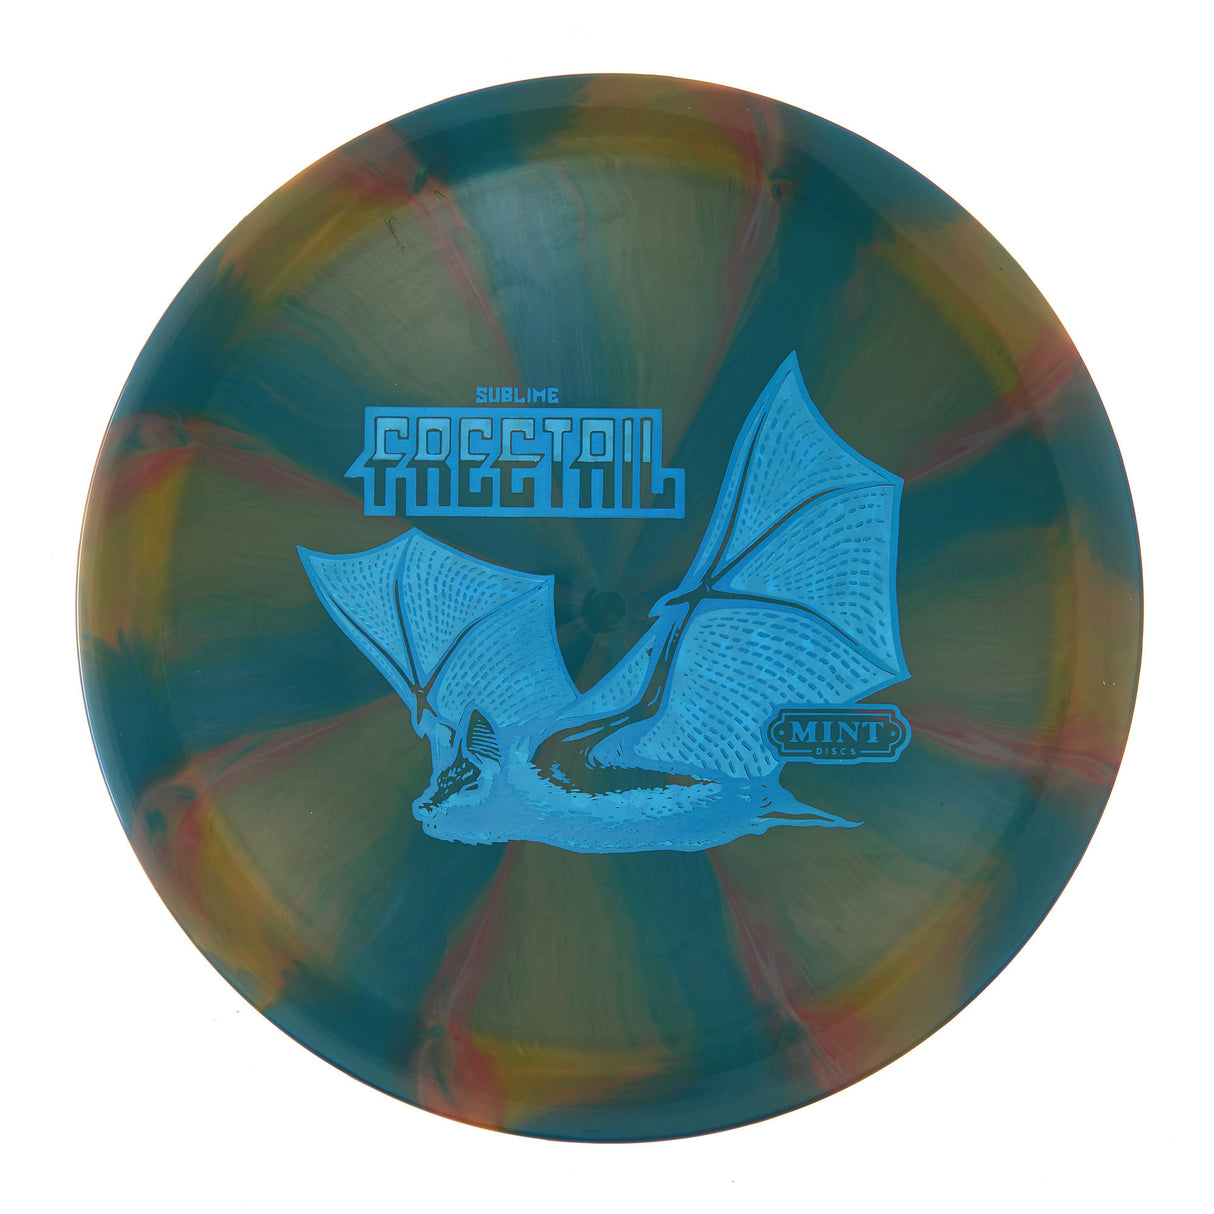 Mint Discs Freetail - Sublime Swirl 175g | Style 0001